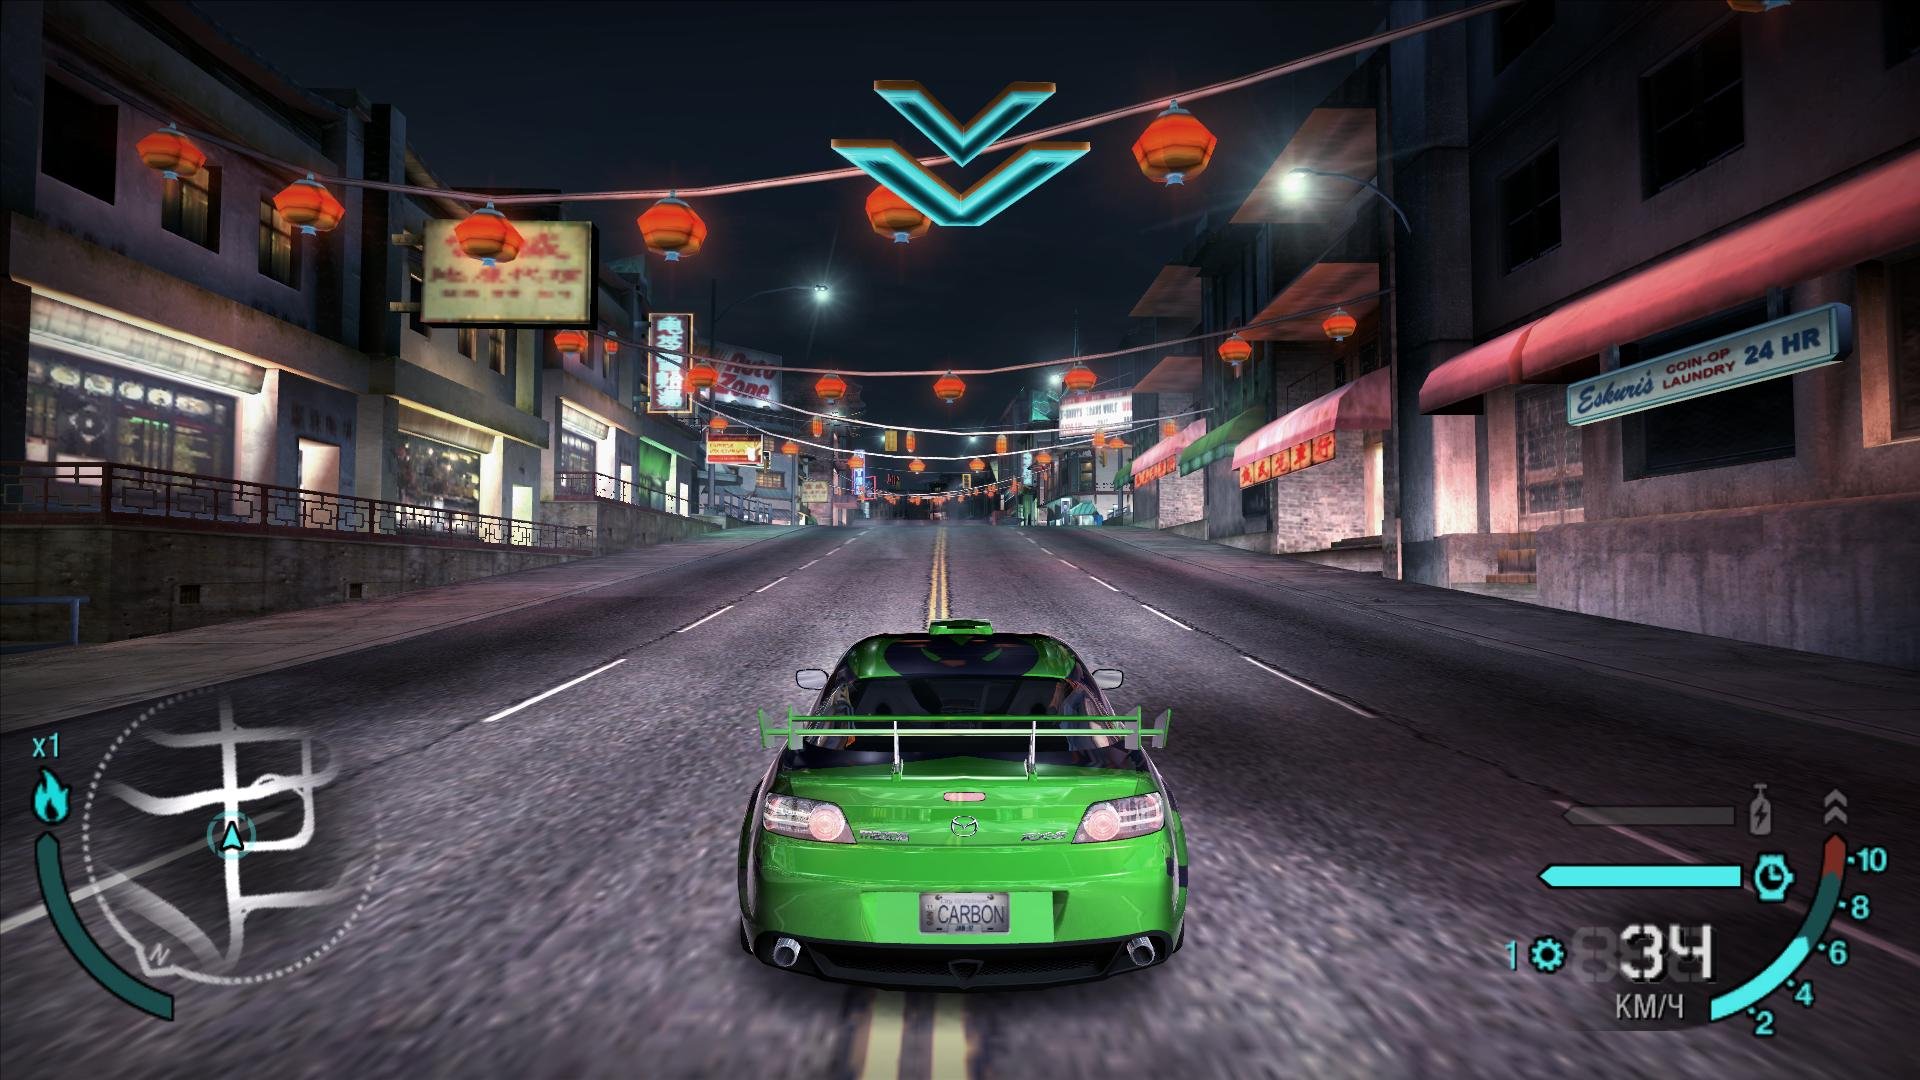 Скриншот 3 к игре Need for Speed: Carbon - Collector's Edition (2006) PC | RePack от Decepticon